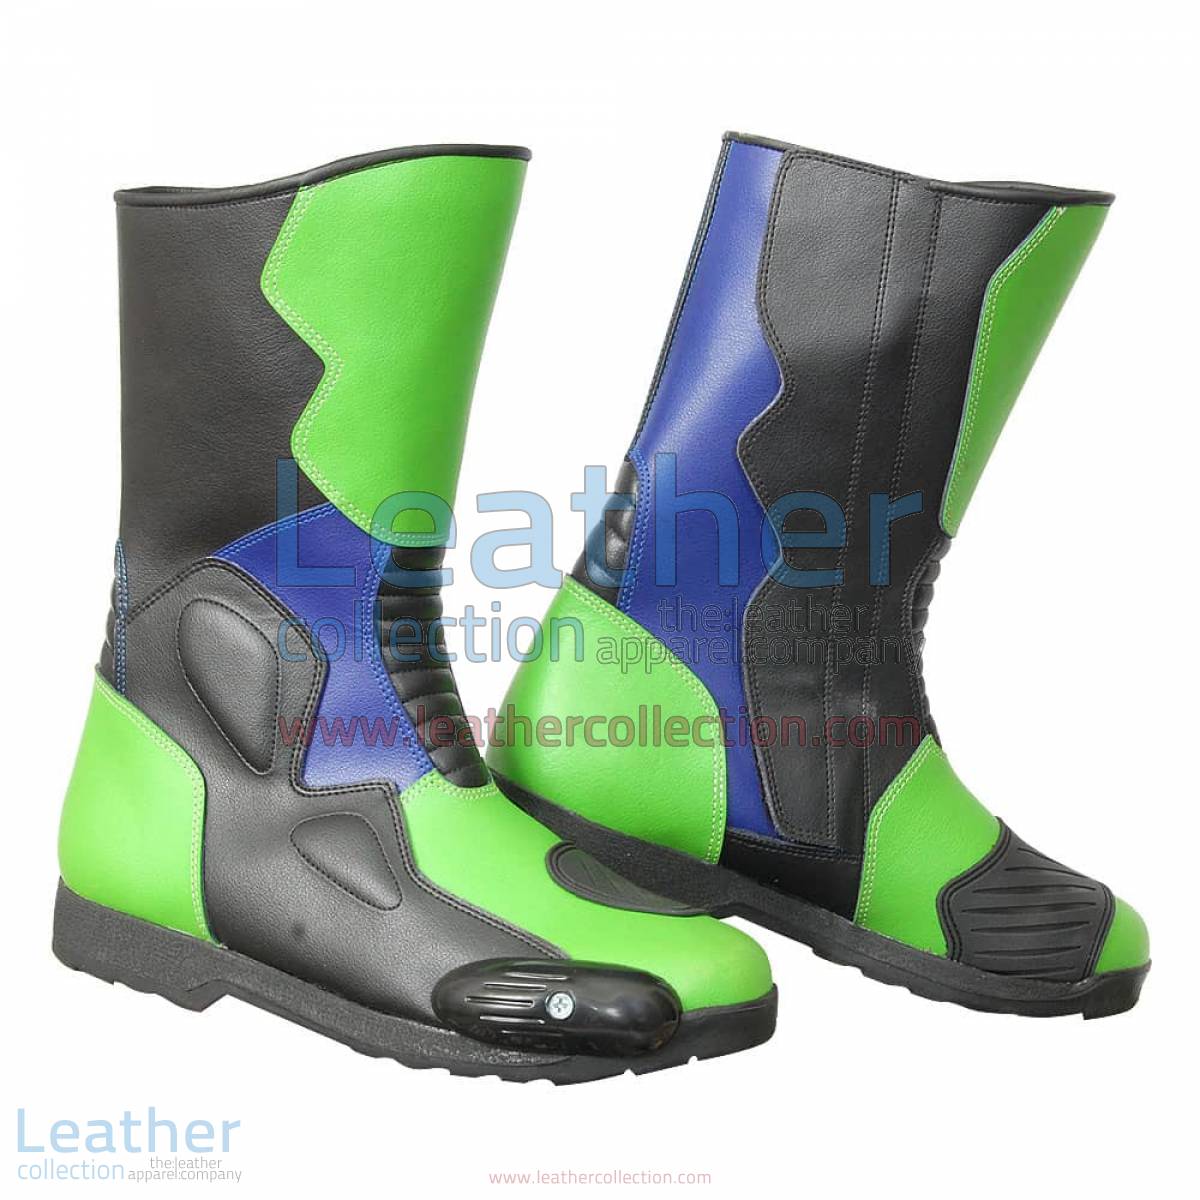 Speed Riding Boots | speed riding boots